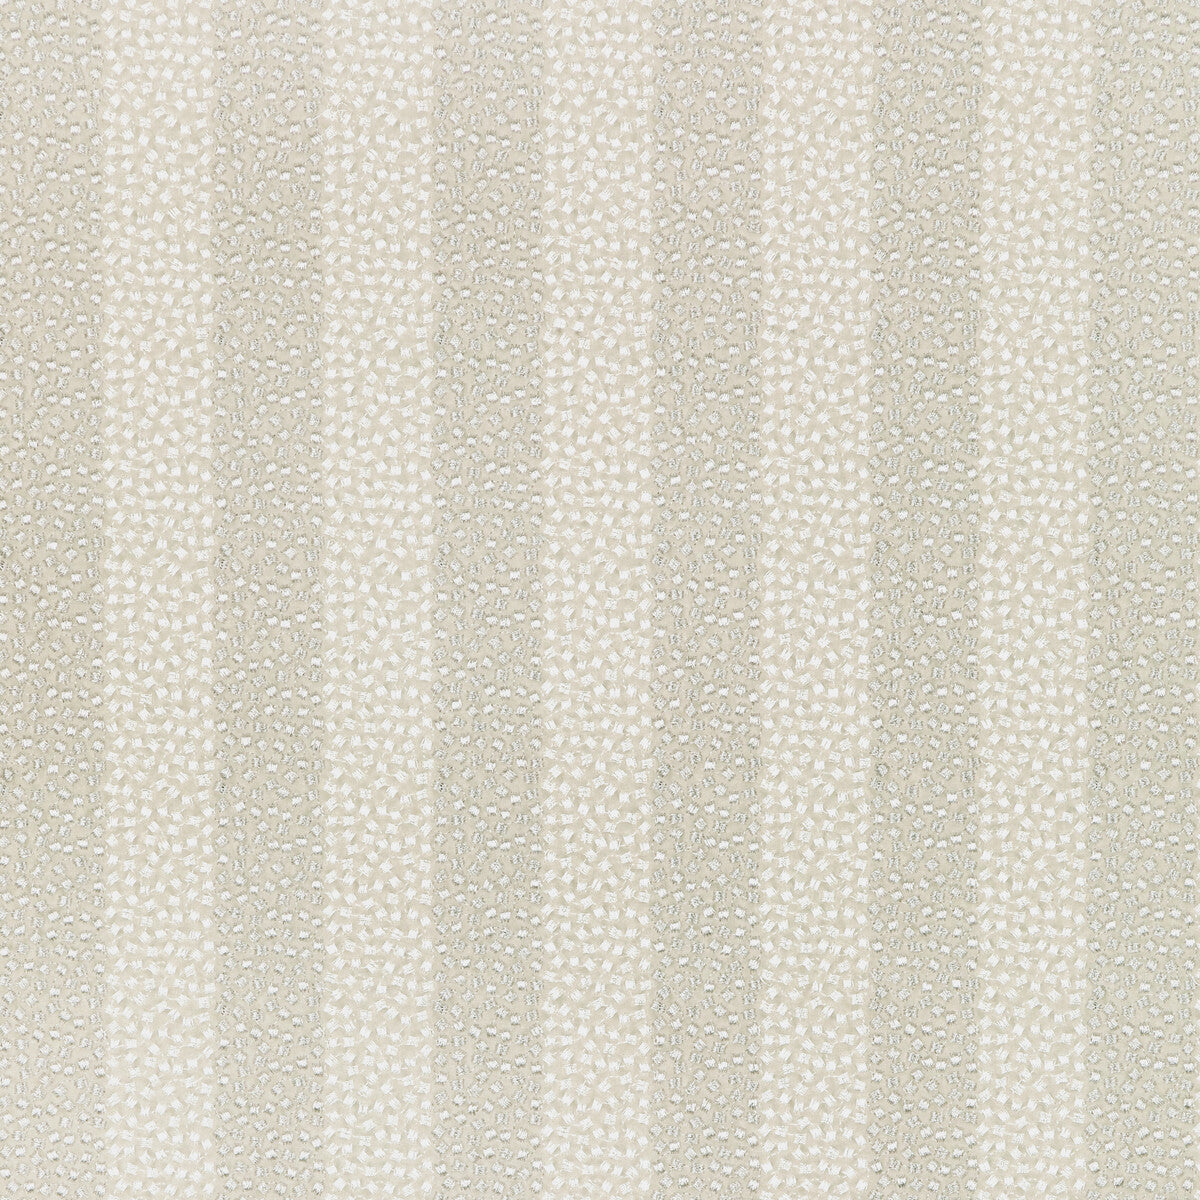 Proximity fabric in platinum color - pattern 36341.11.0 - by Kravet Couture in the Modern Luxe III collection